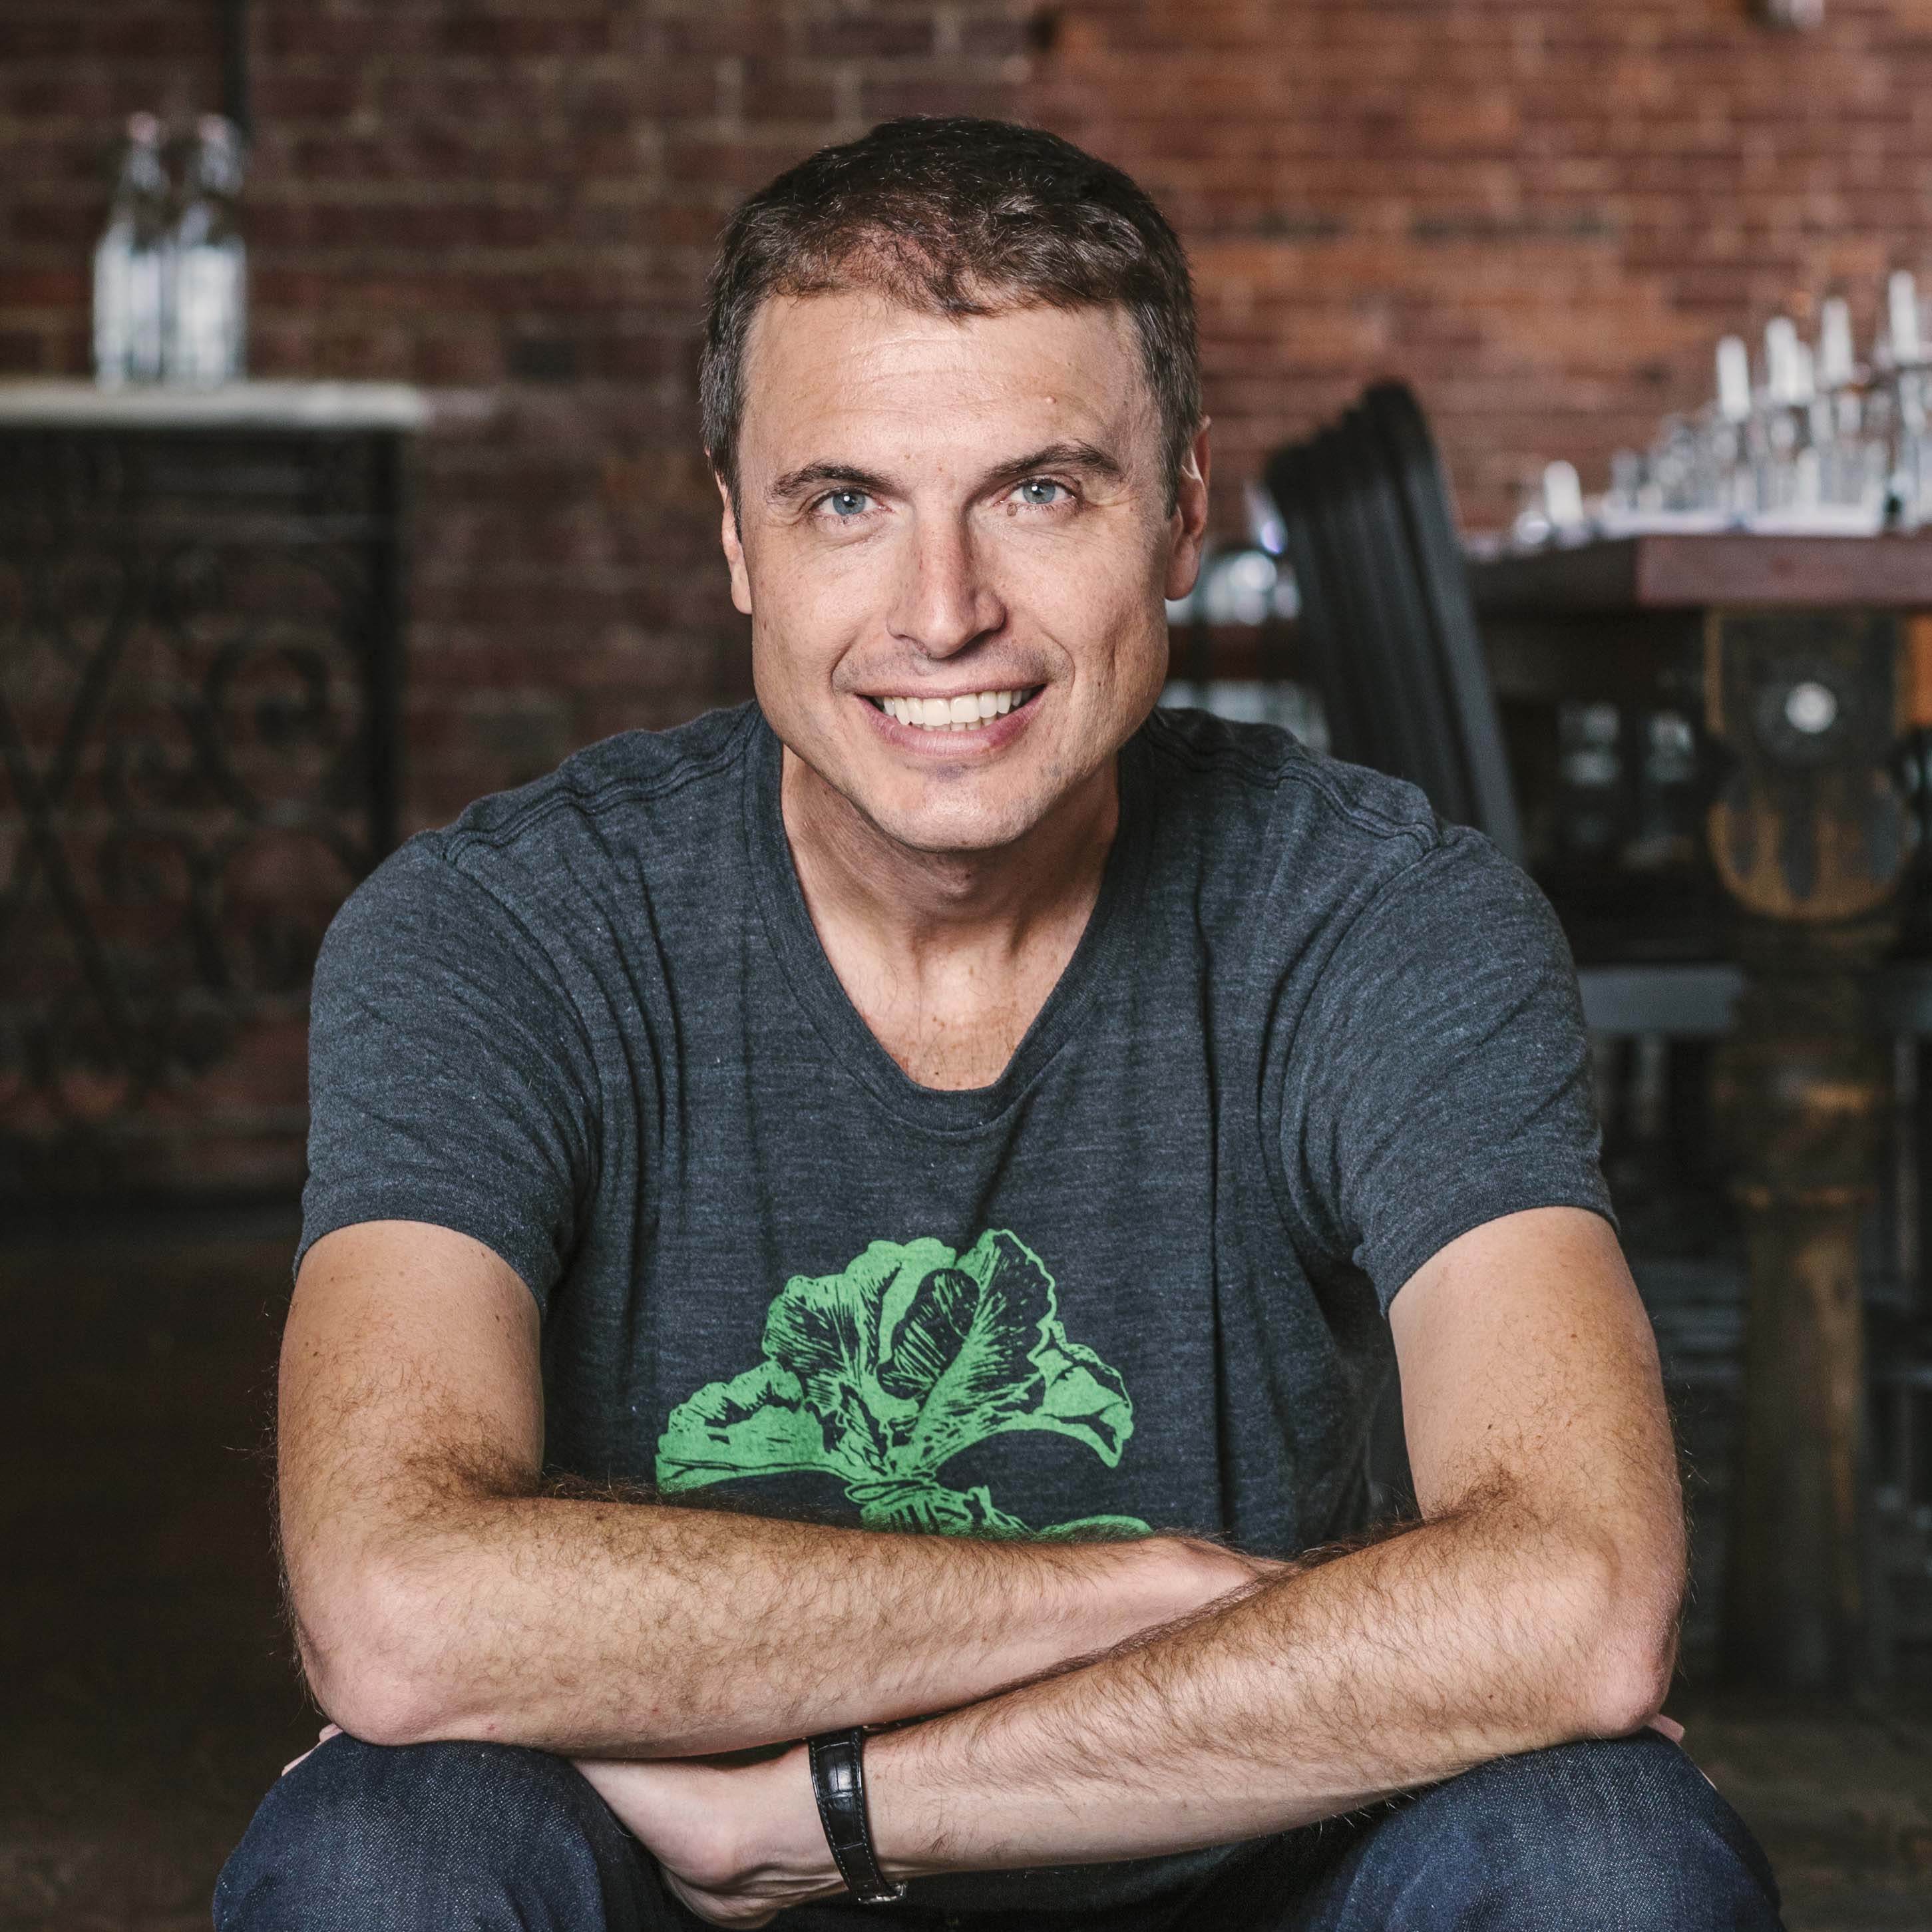 Kimbal Musk, chef and the co-founder of the restaurant The Kitchen and The Kitchen Community, to keynote WorldFuture 2016 Summit, July 22-24.